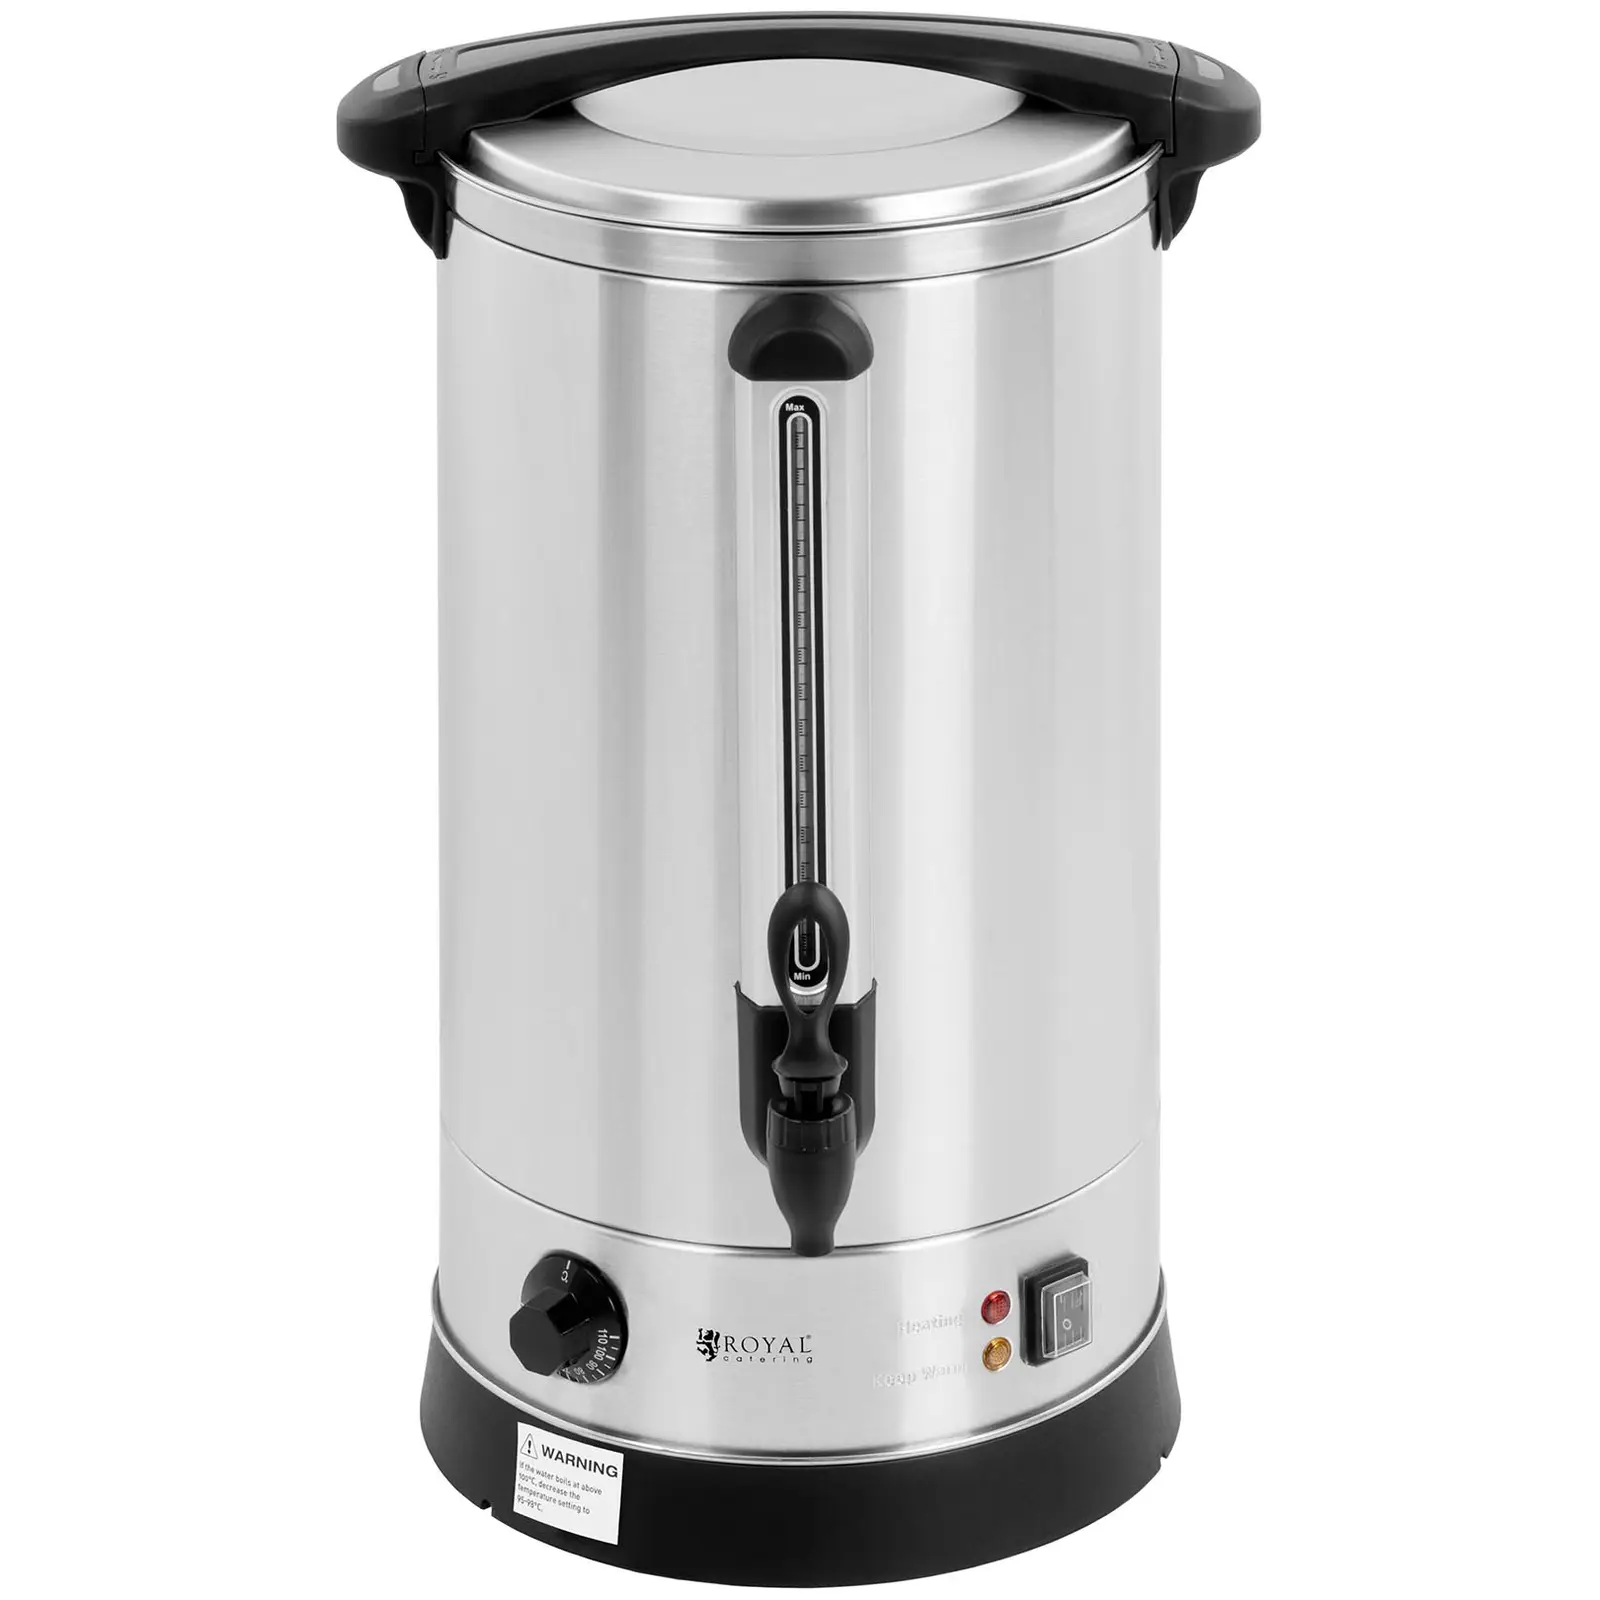 Hot Water Dispenser - 20.5 L - kettle - double walled - stainless steel	